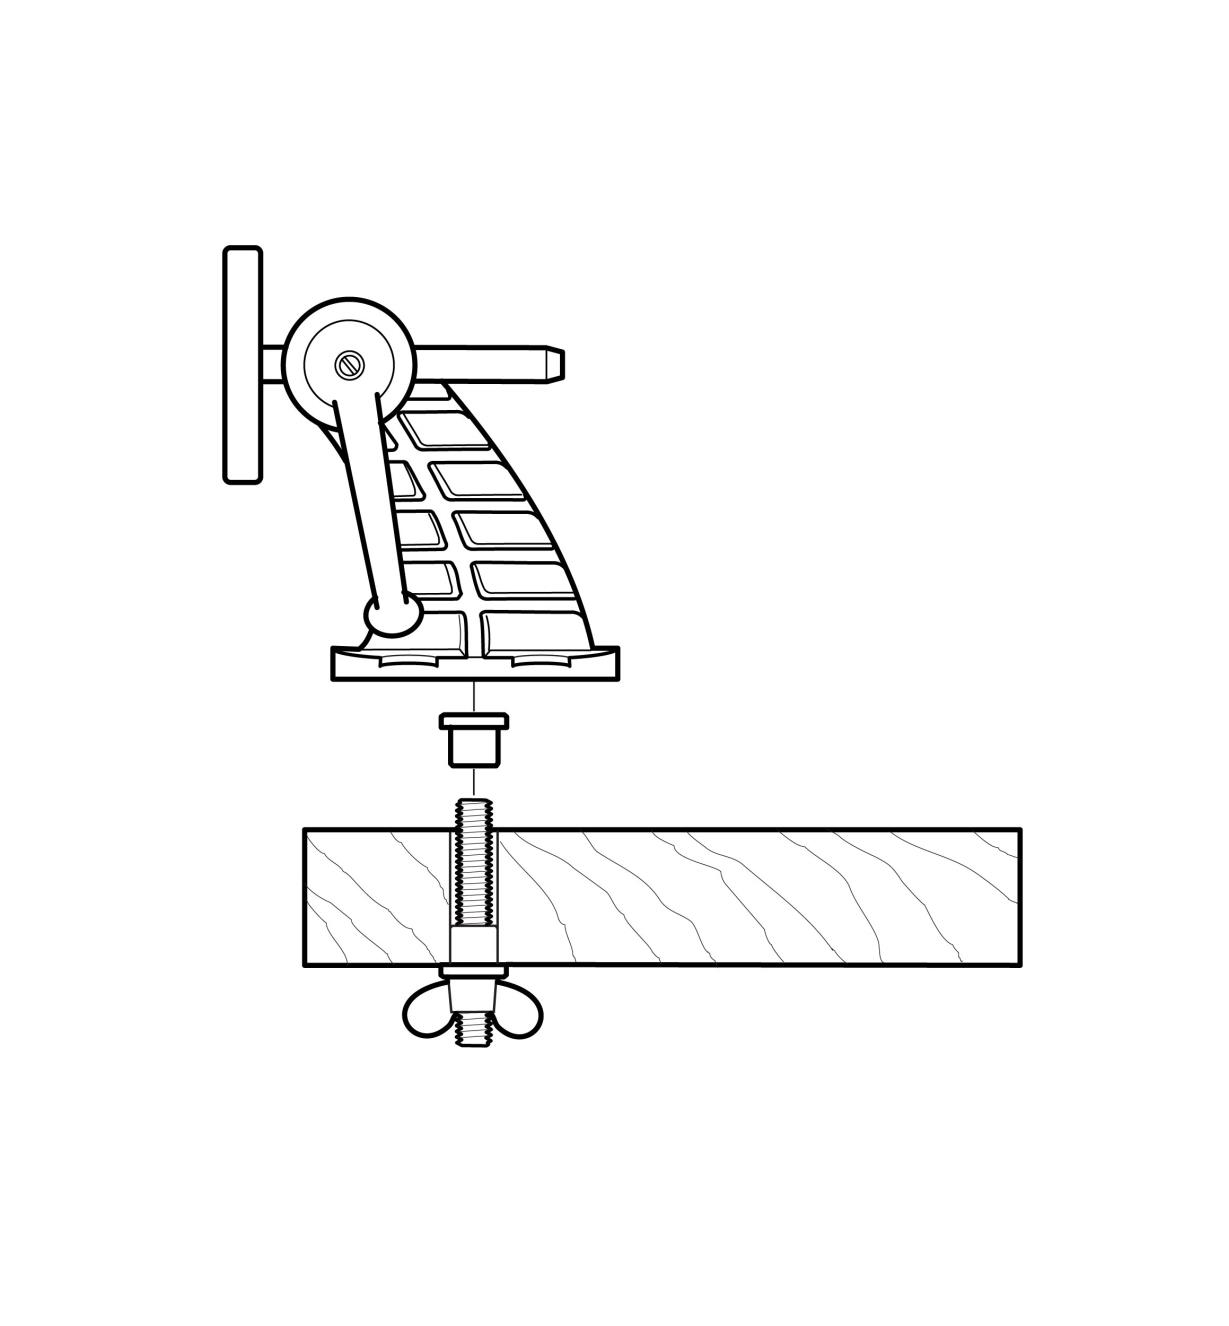 Illustration showing how to bolt the vise to a bench through a dog hole with the mounting plate vertical